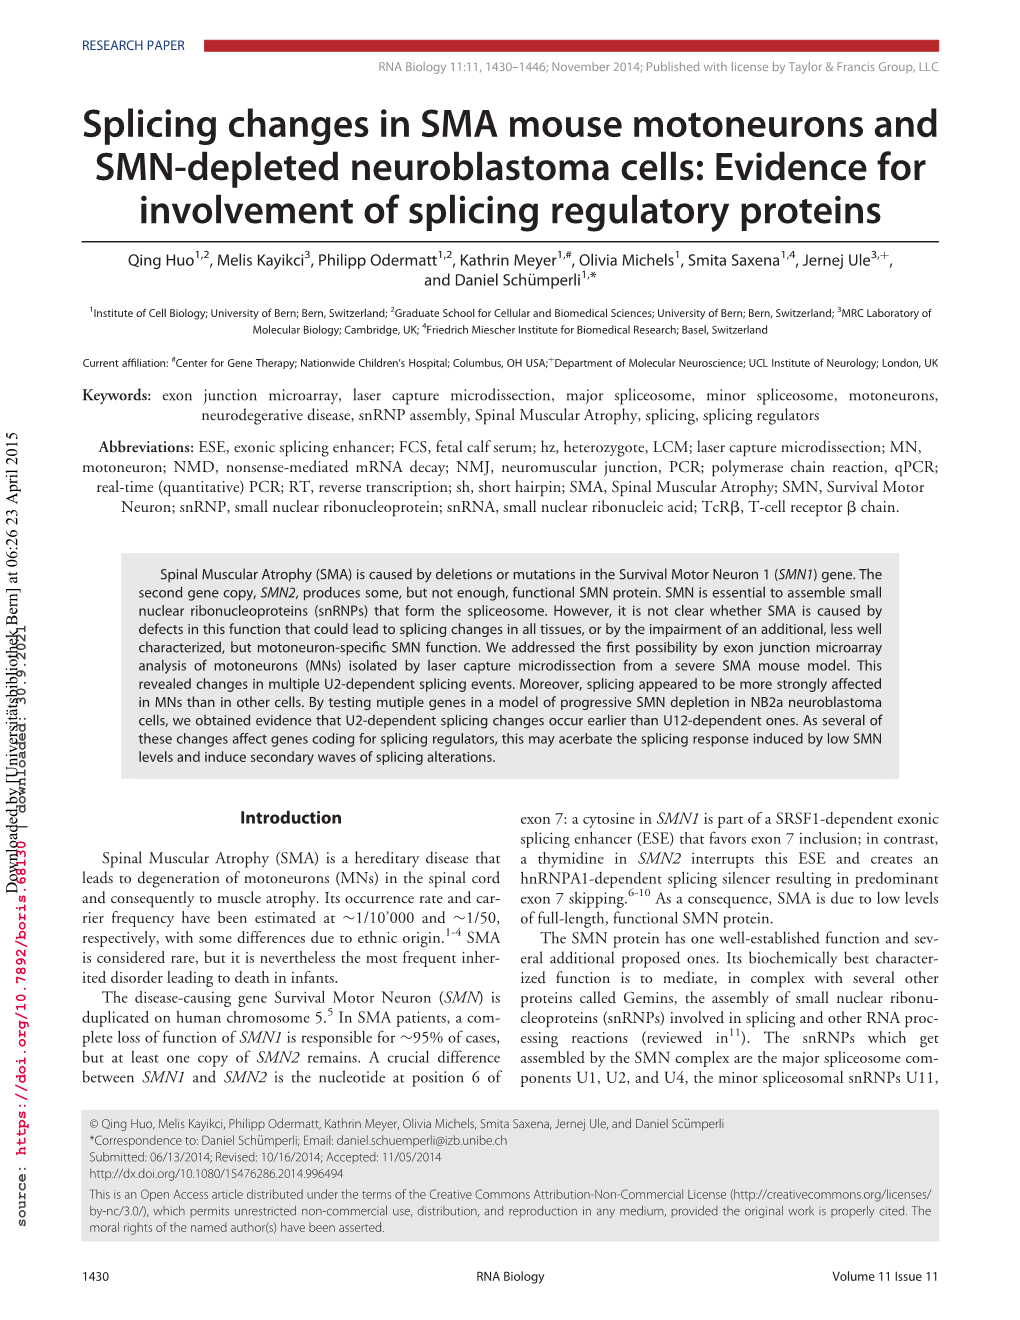 Splicing Changes in SMA Mouse Motoneurons and SMN-Depleted Neuroblastoma Cells